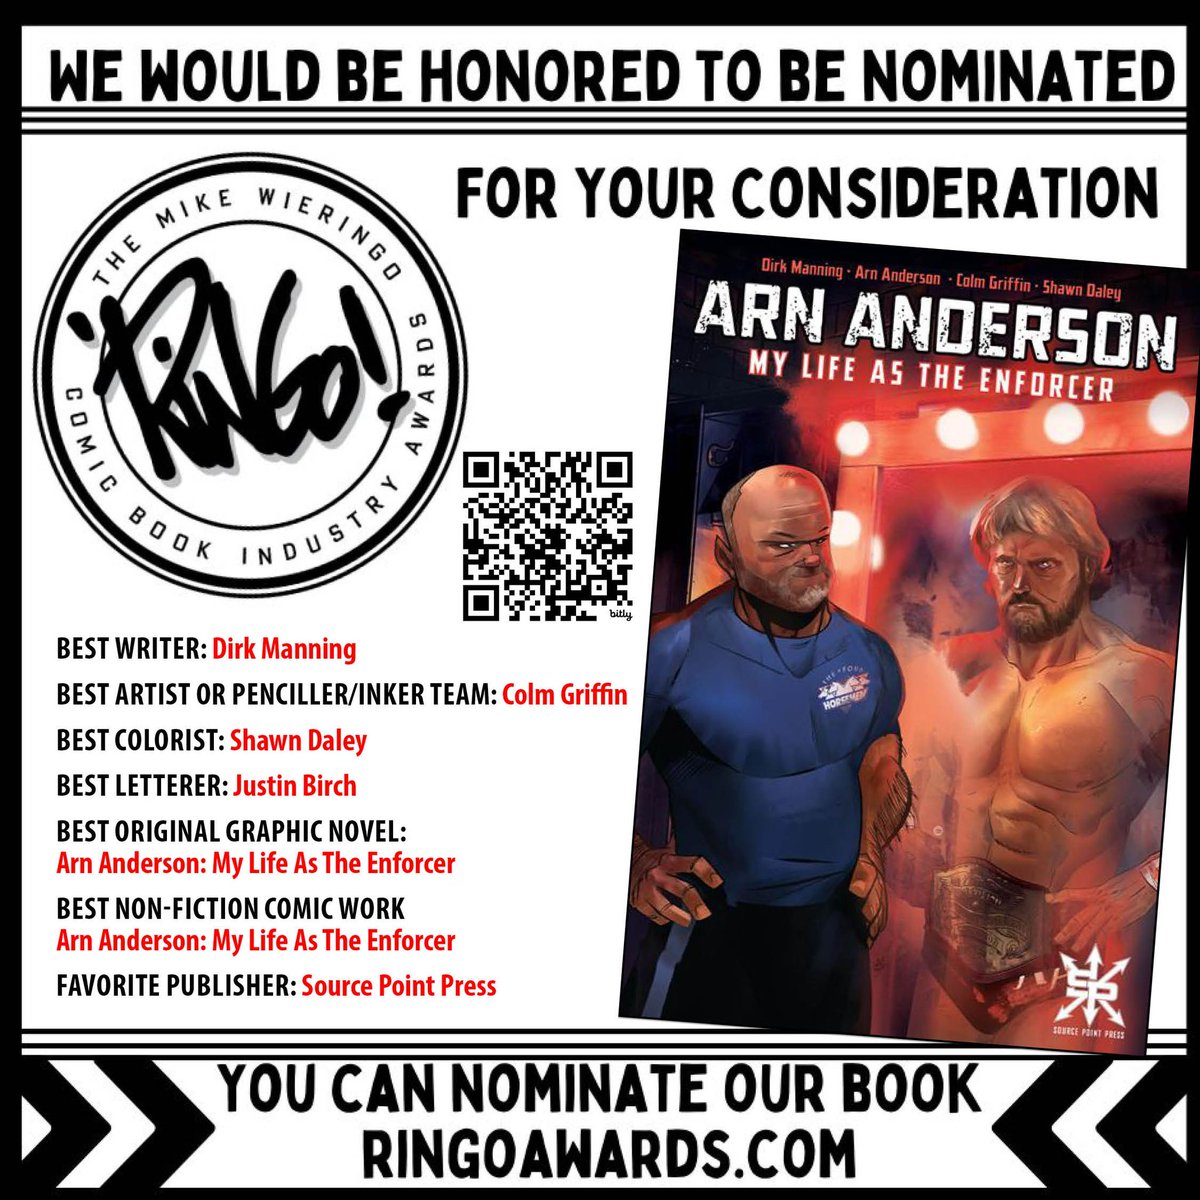 Calling all of my fans! I need your help to get my new graphic novel nominated for the prestigious Ringo Awards. Please do me a big favor and take the time to nominate us under the categories listed in the graphic. RingoAwards.com @DirkManning @SourcePtPress